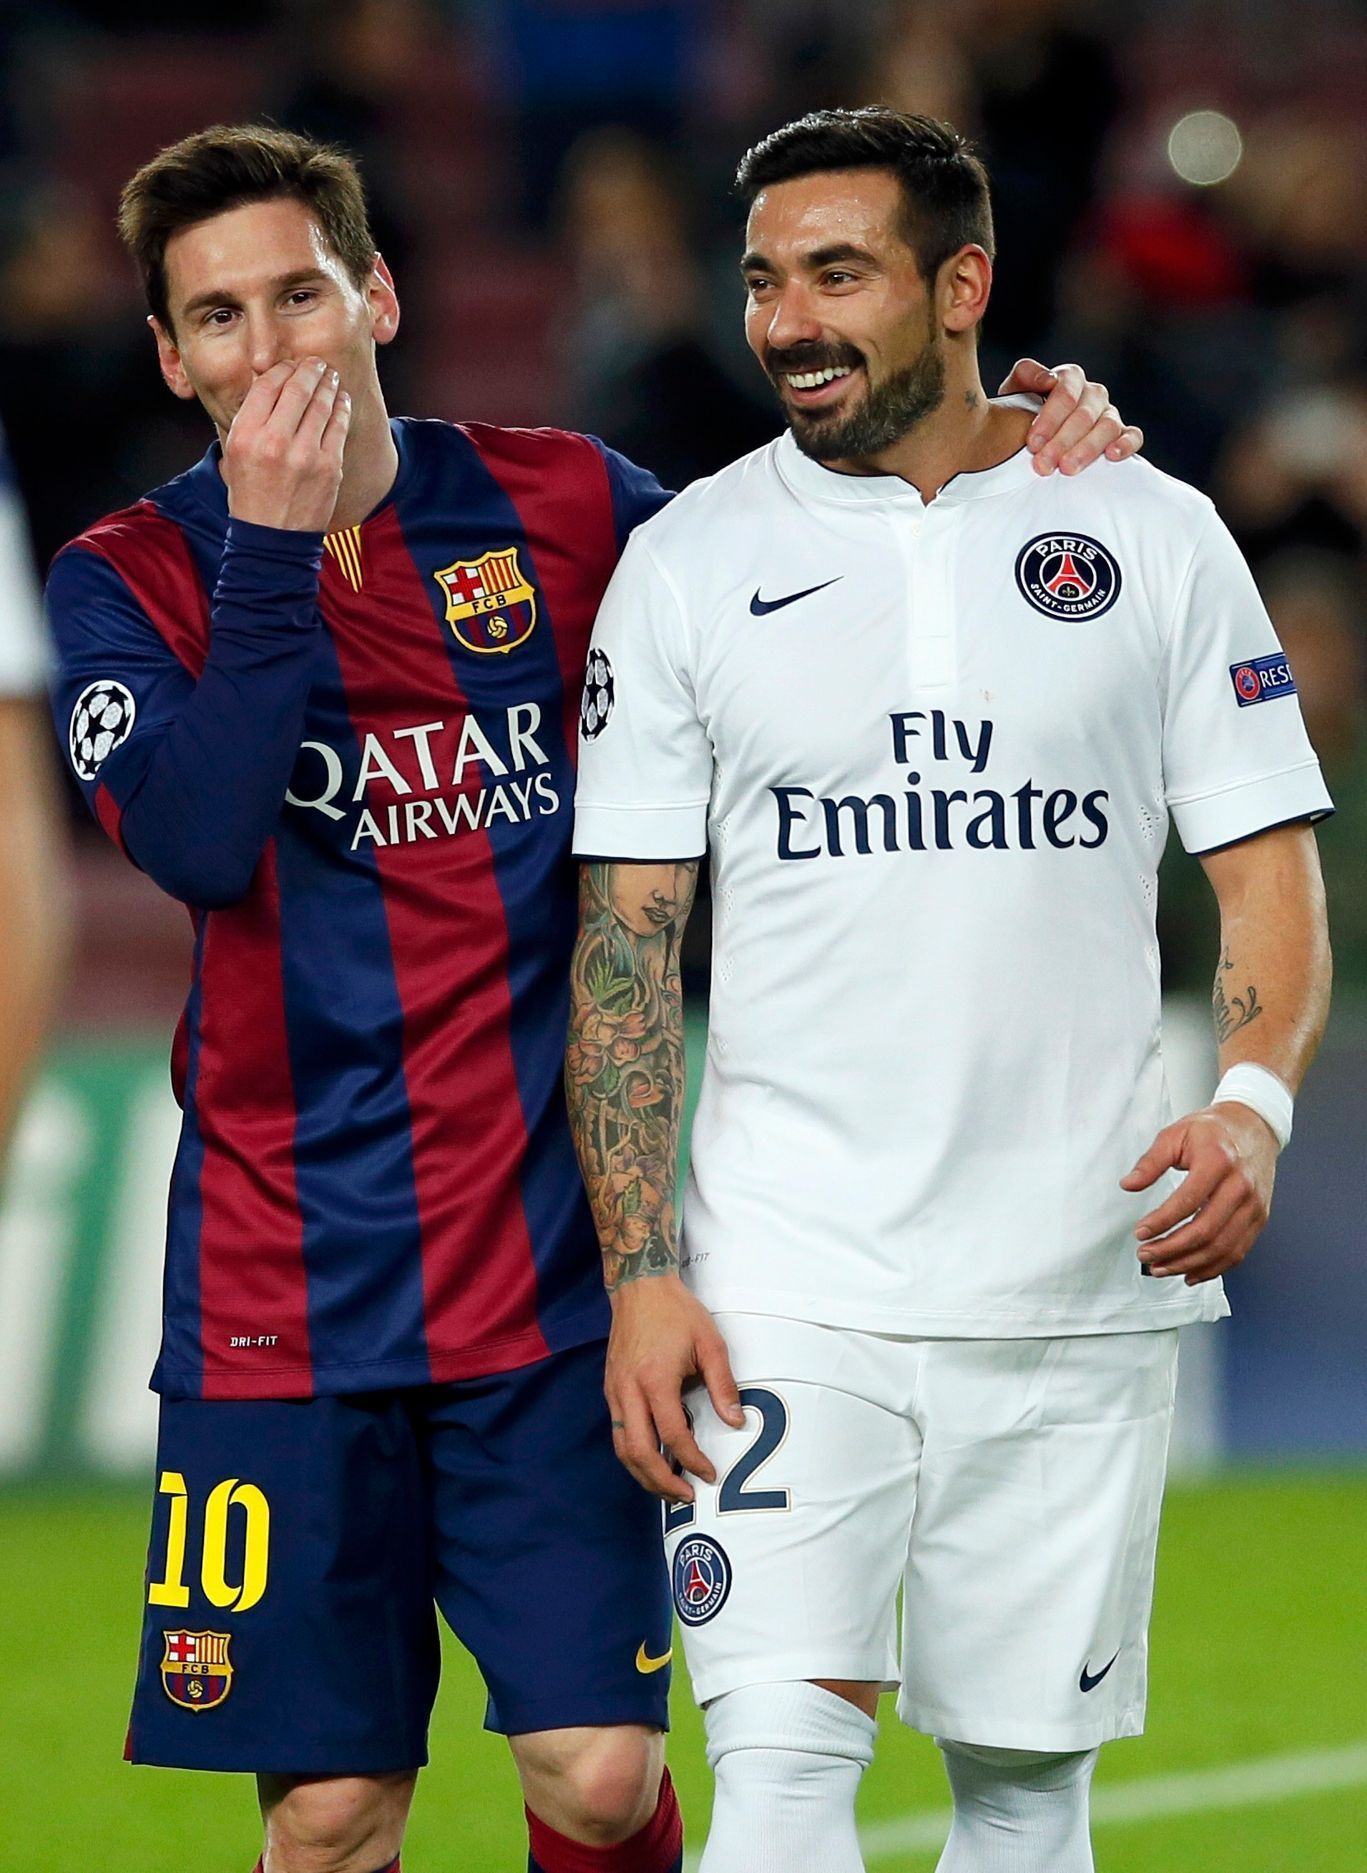 Paris St Germain's Ezequiel Lavezzi walks off the pitch with his compatriot Barcelona's Lionel Messi at the end of their Champions League Group F soccer match at the Nou Camp stadium in Barcelona